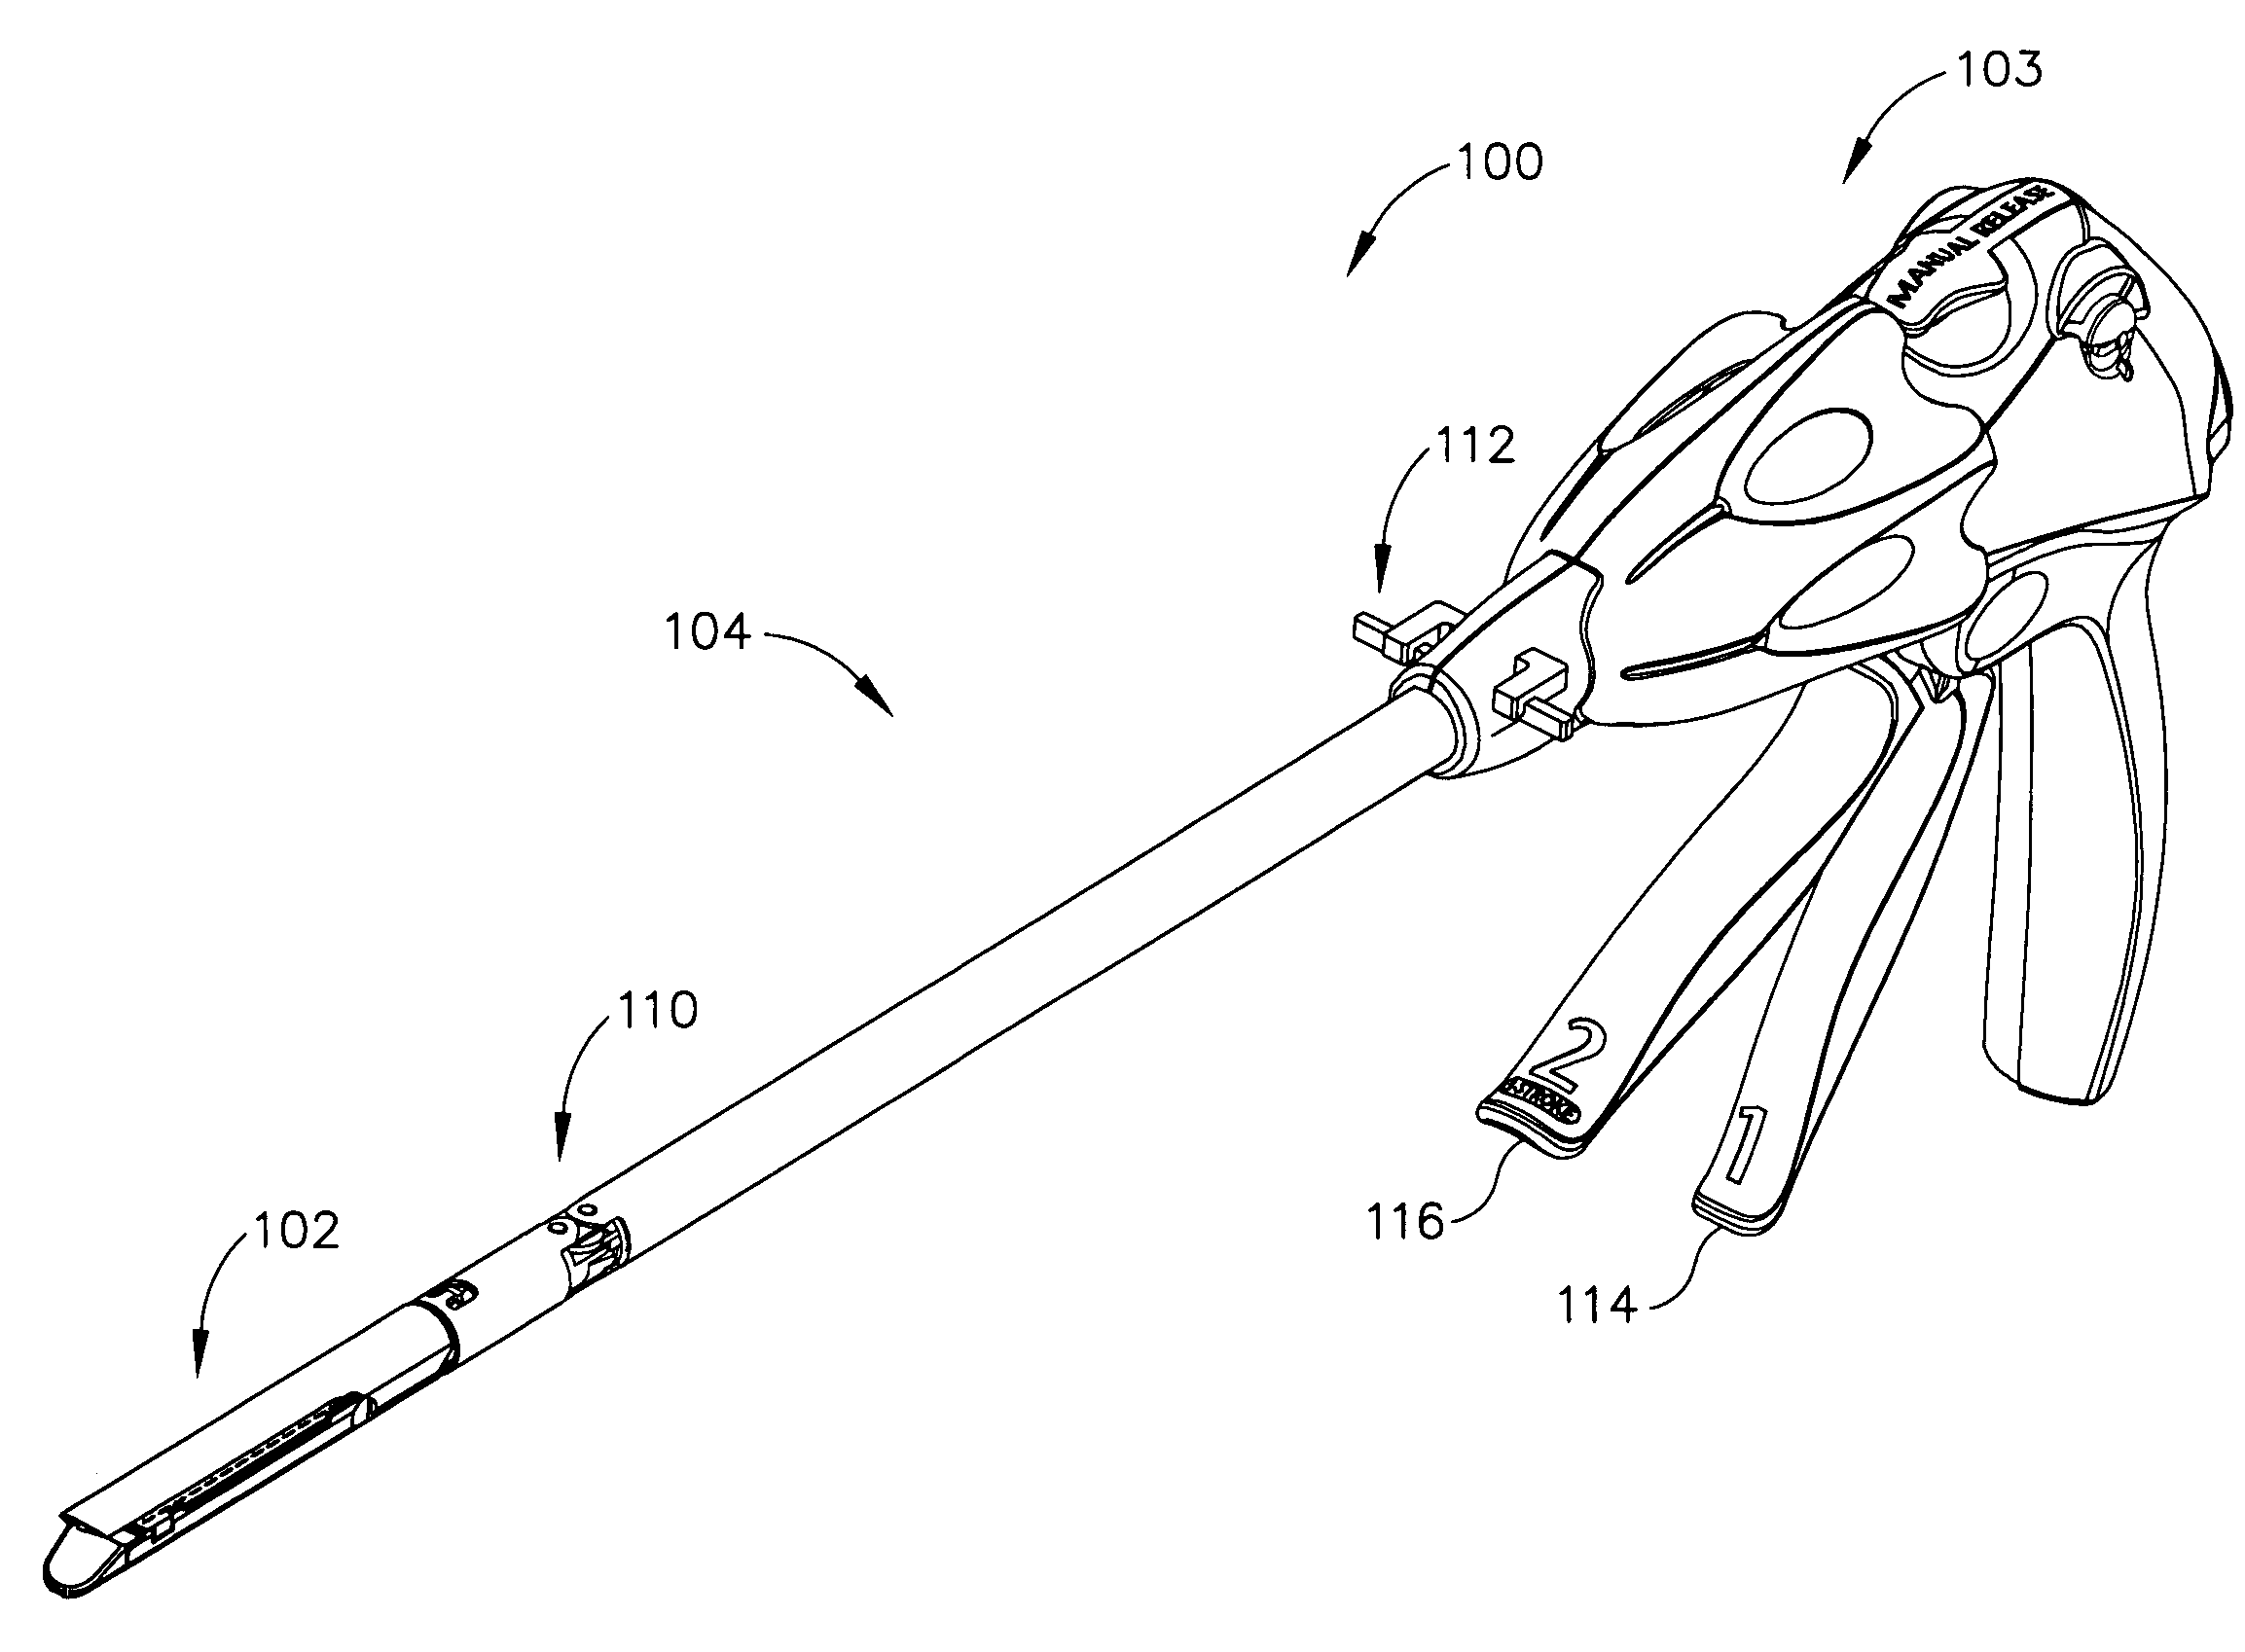 Surgical instrument having an articulating end effector